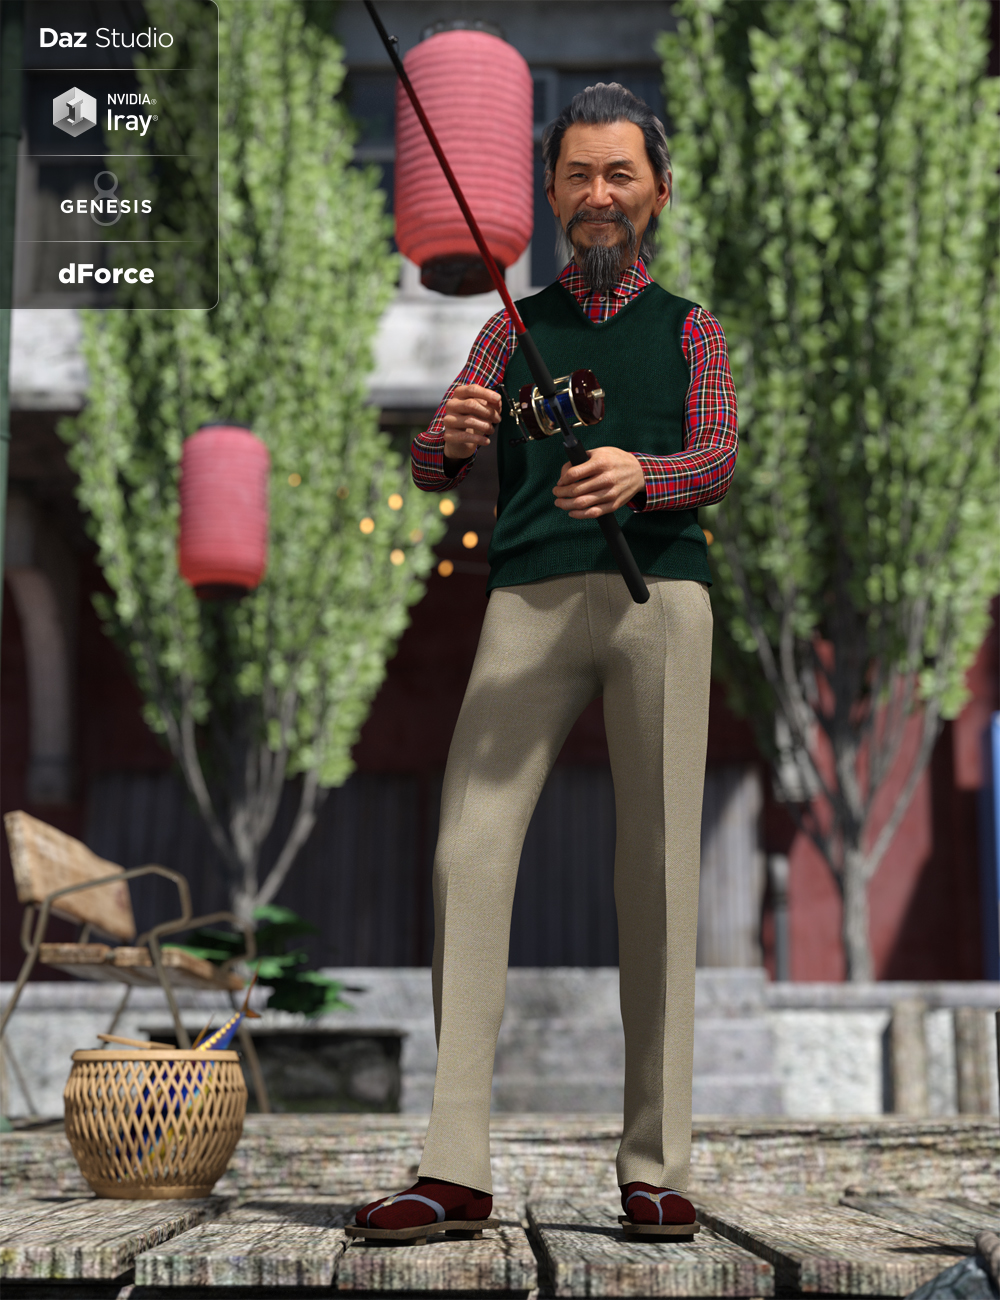 Sweater Vest Outfit Textures (Genesis 8 Male) by: Anna Benjamin, 3D Models by Daz 3D